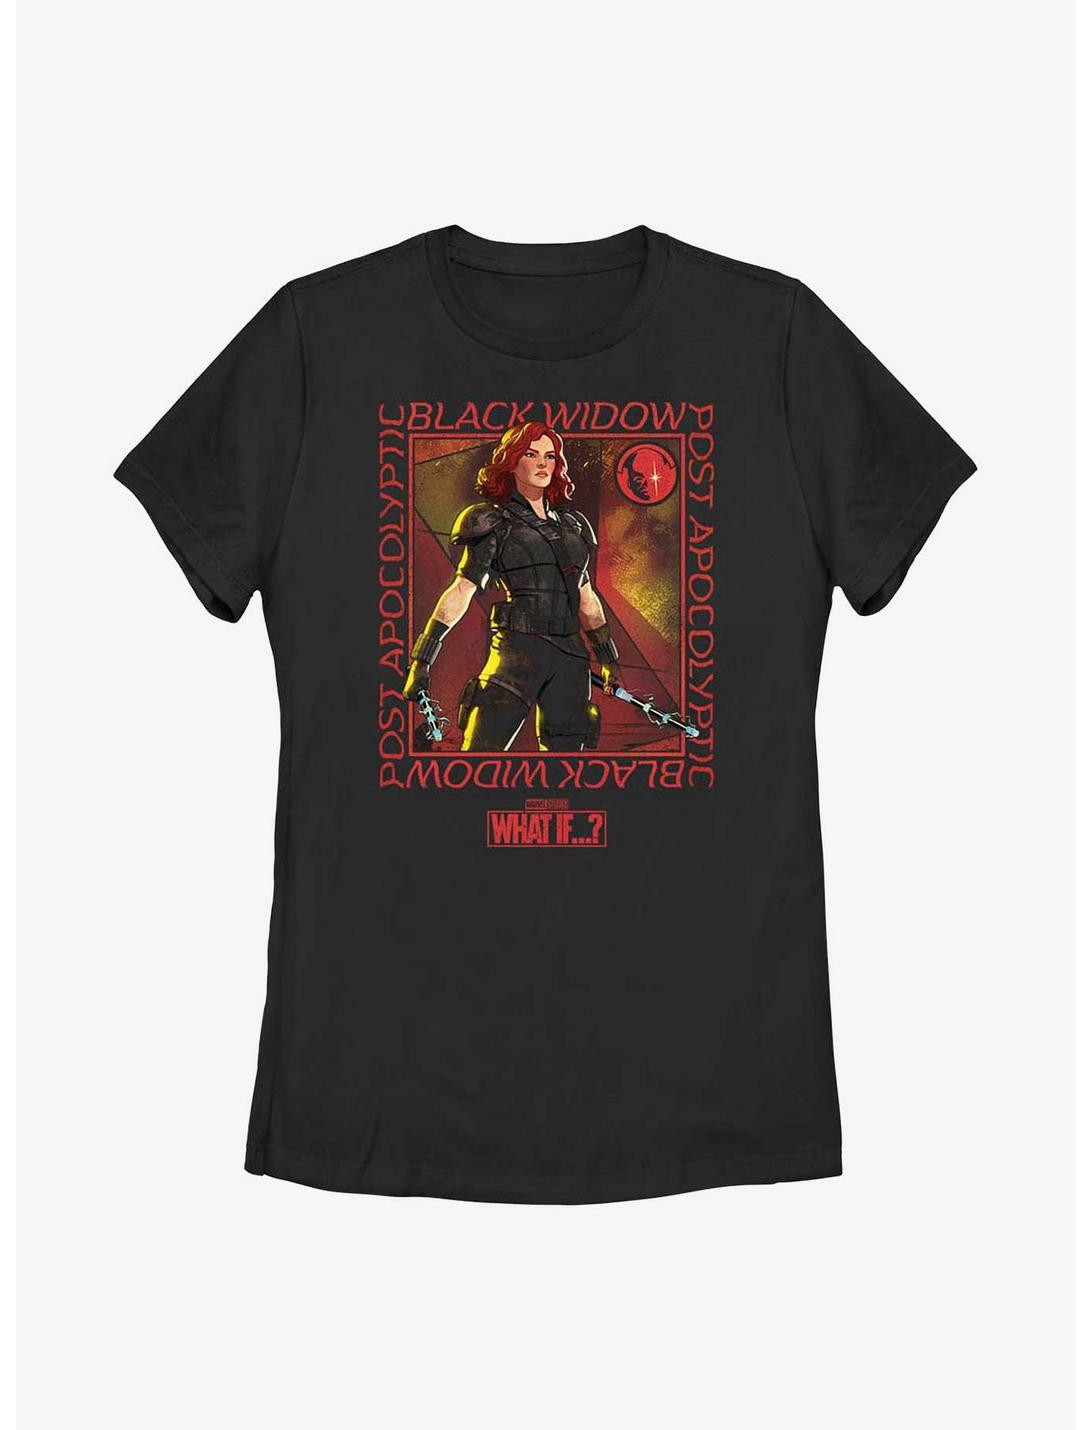 Marvel What If?? Post Apocolyptic Black Widow Womens T-Shirt, BLACK, hi-res